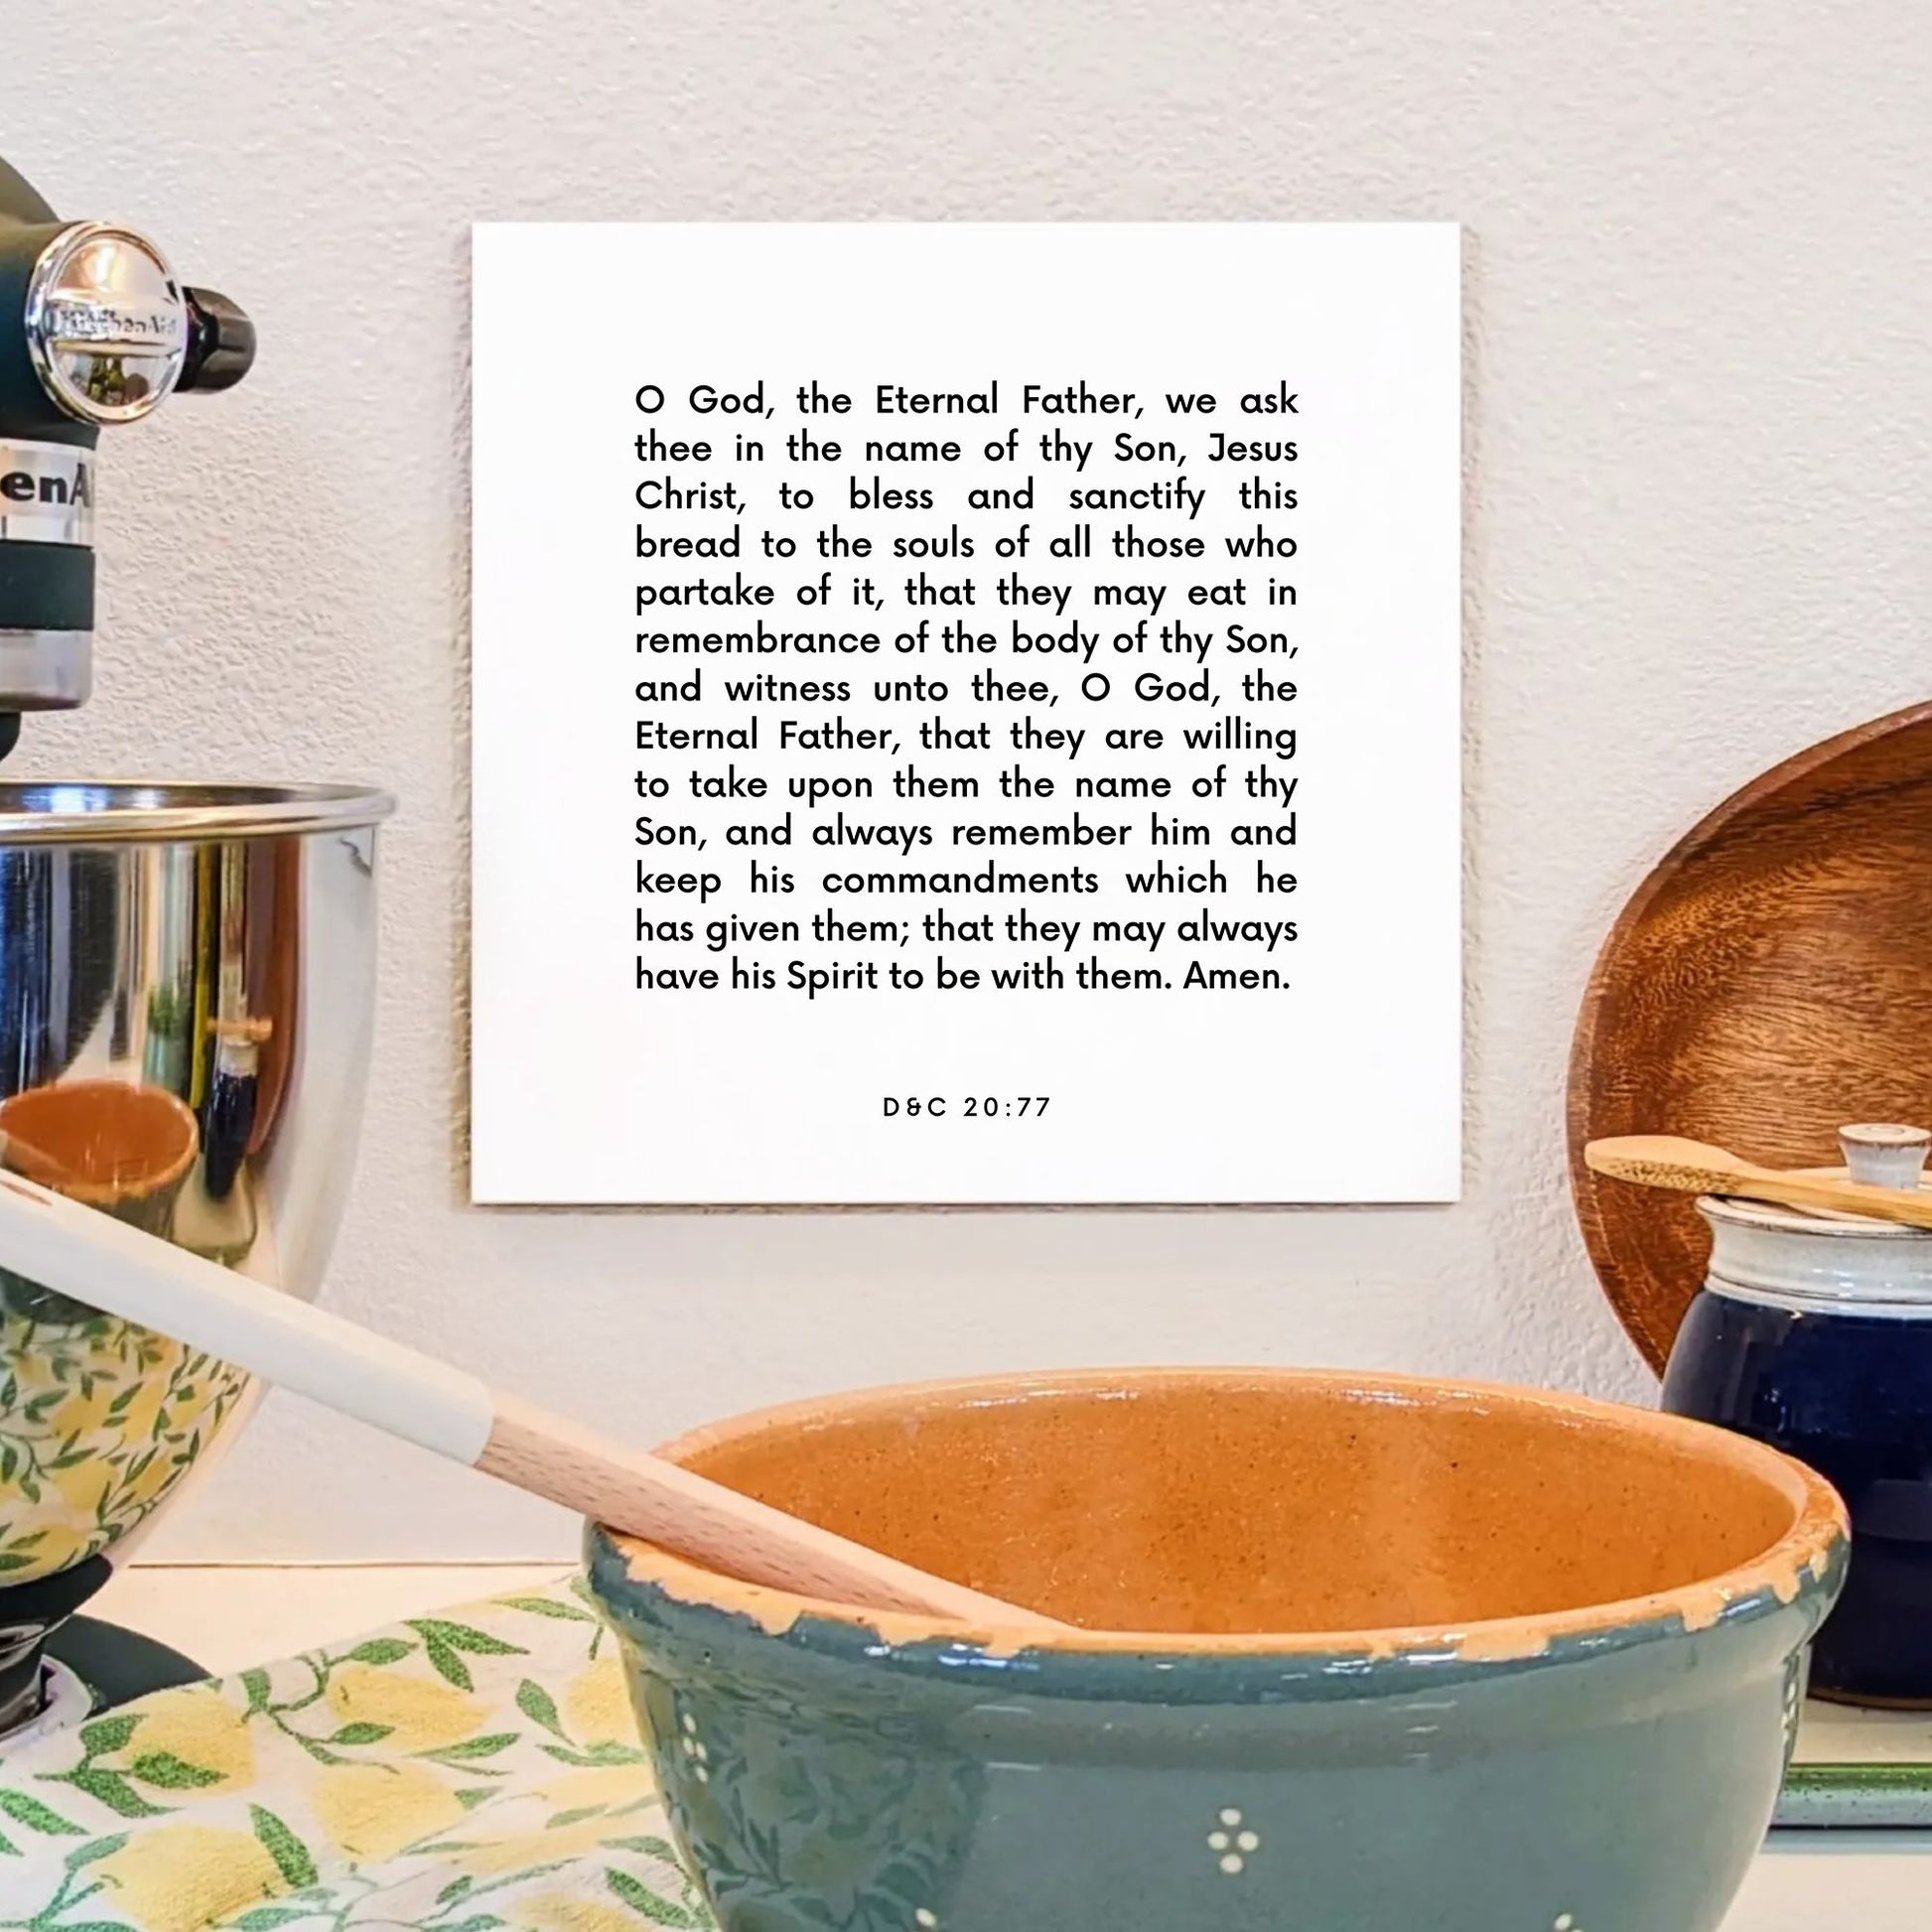 Kitchen mouting of the scripture tile for D&C 20:77 - "We ask thee to bless and sanctify this bread"